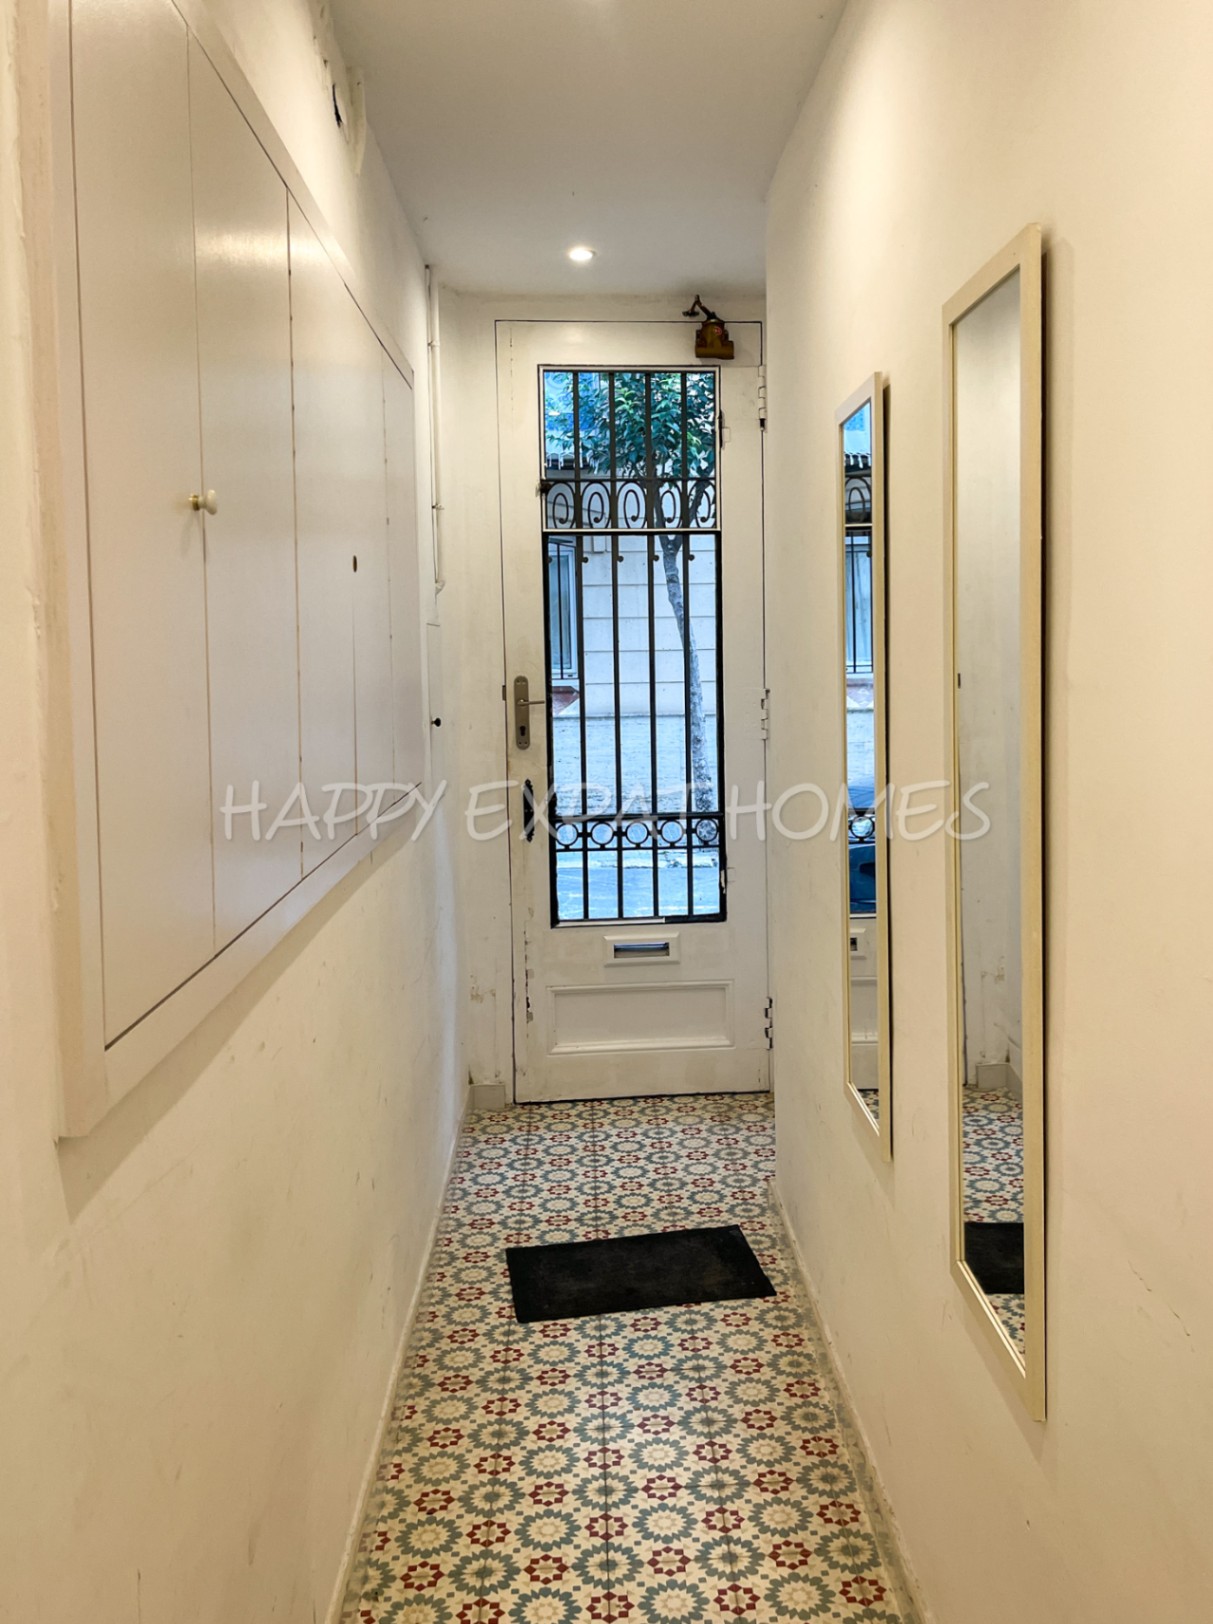 Flat in Sitges centre close to the beach